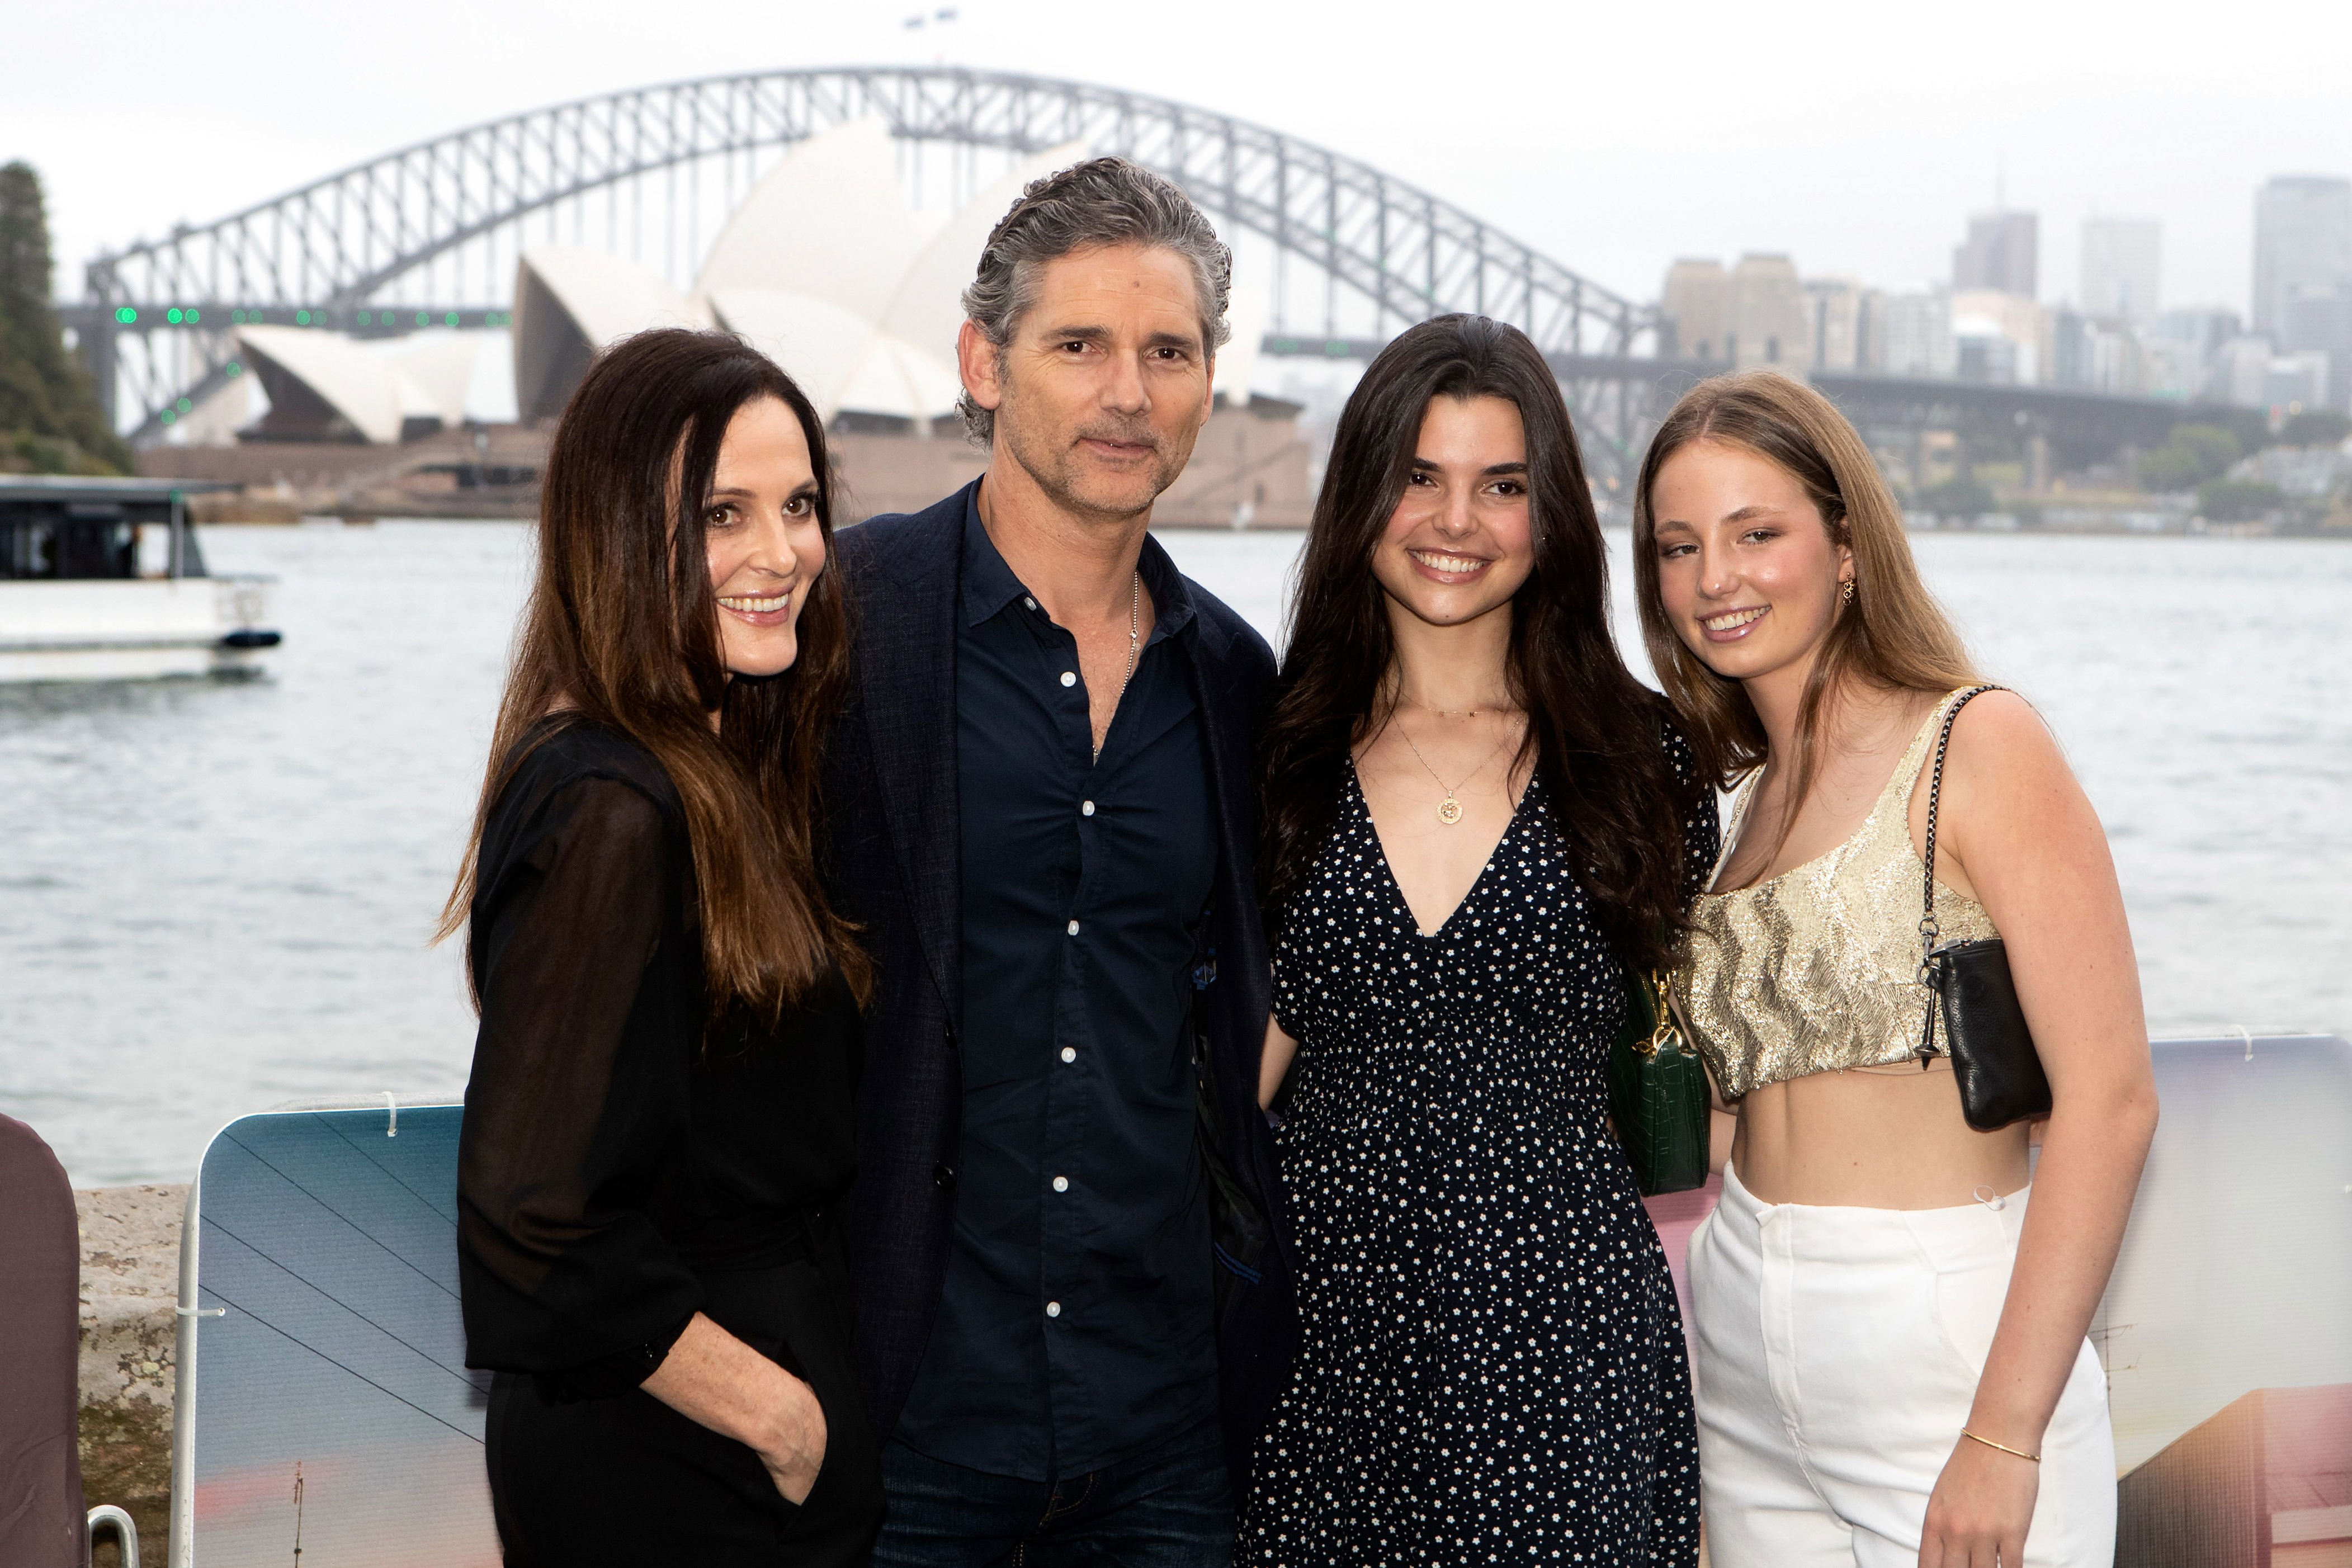 <p>Eric Bana posed with wife Rebecca Gleeson, daughter Sophia Banadinović (second from right) -- who was born in 2002 -- and niece Jasmine Taylor at the premiere of his film "The Dry" in Sydney, Australia, in December 2020. Eric and Rebecca are also parents to son Klaus, who was born in 1998. (Eric's mini-me can be seen on Rebecca's photography business Instagram page <a href="https://www.instagram.com/p/BQM6VvDF4vc/">here</a>.)</p>